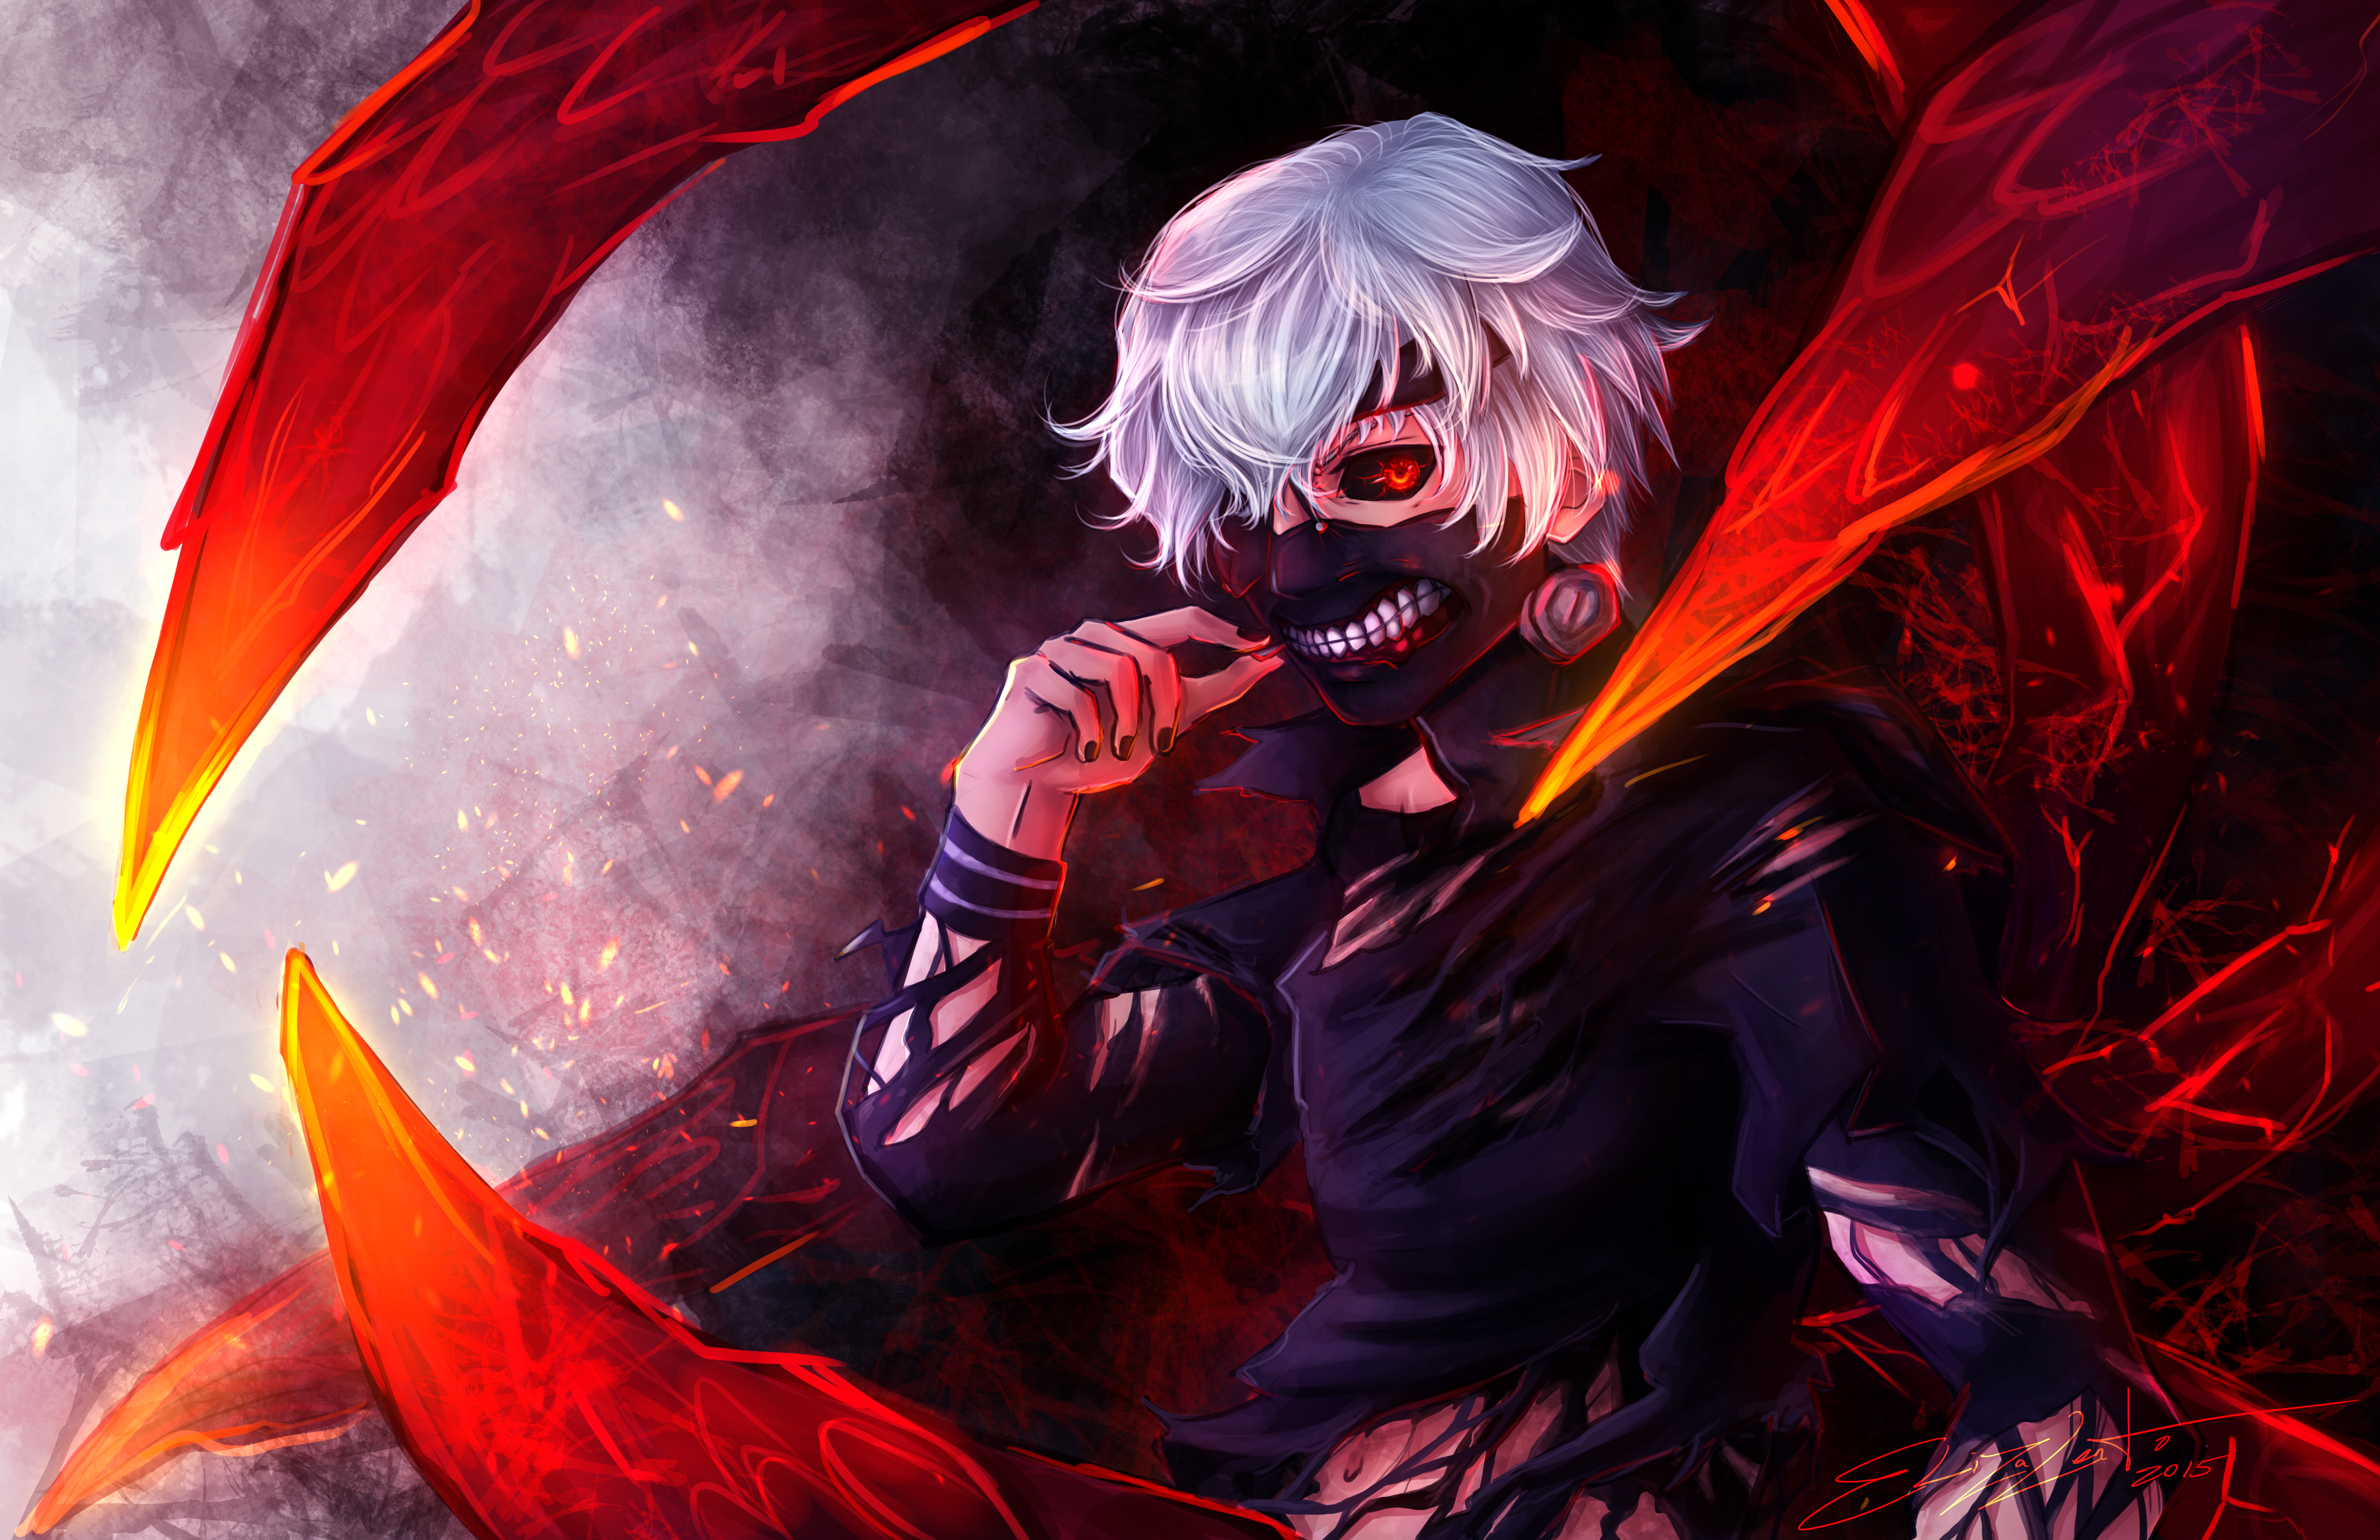 Tokyo Ghoul 4k Ultra HD Wallpaper. Background Imagex3300